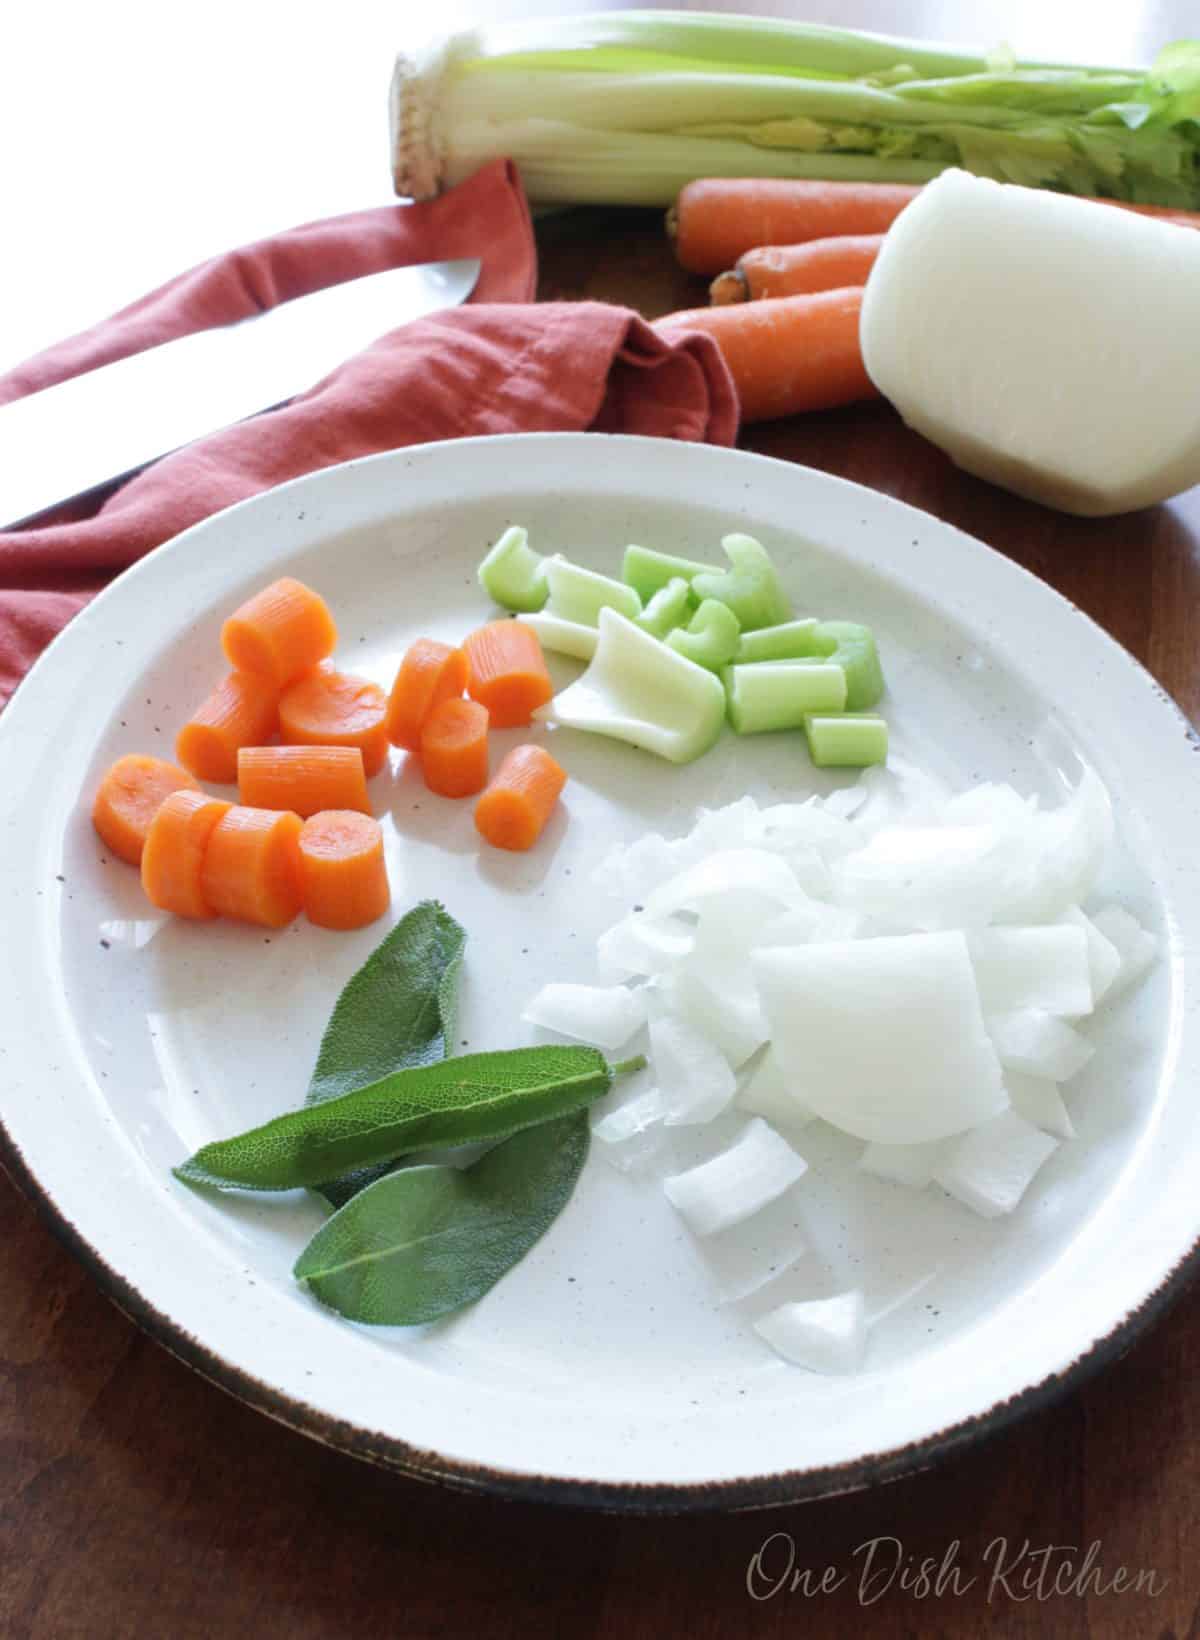 a plate filled with sage leaves, carrots, celery, and chopped onions.